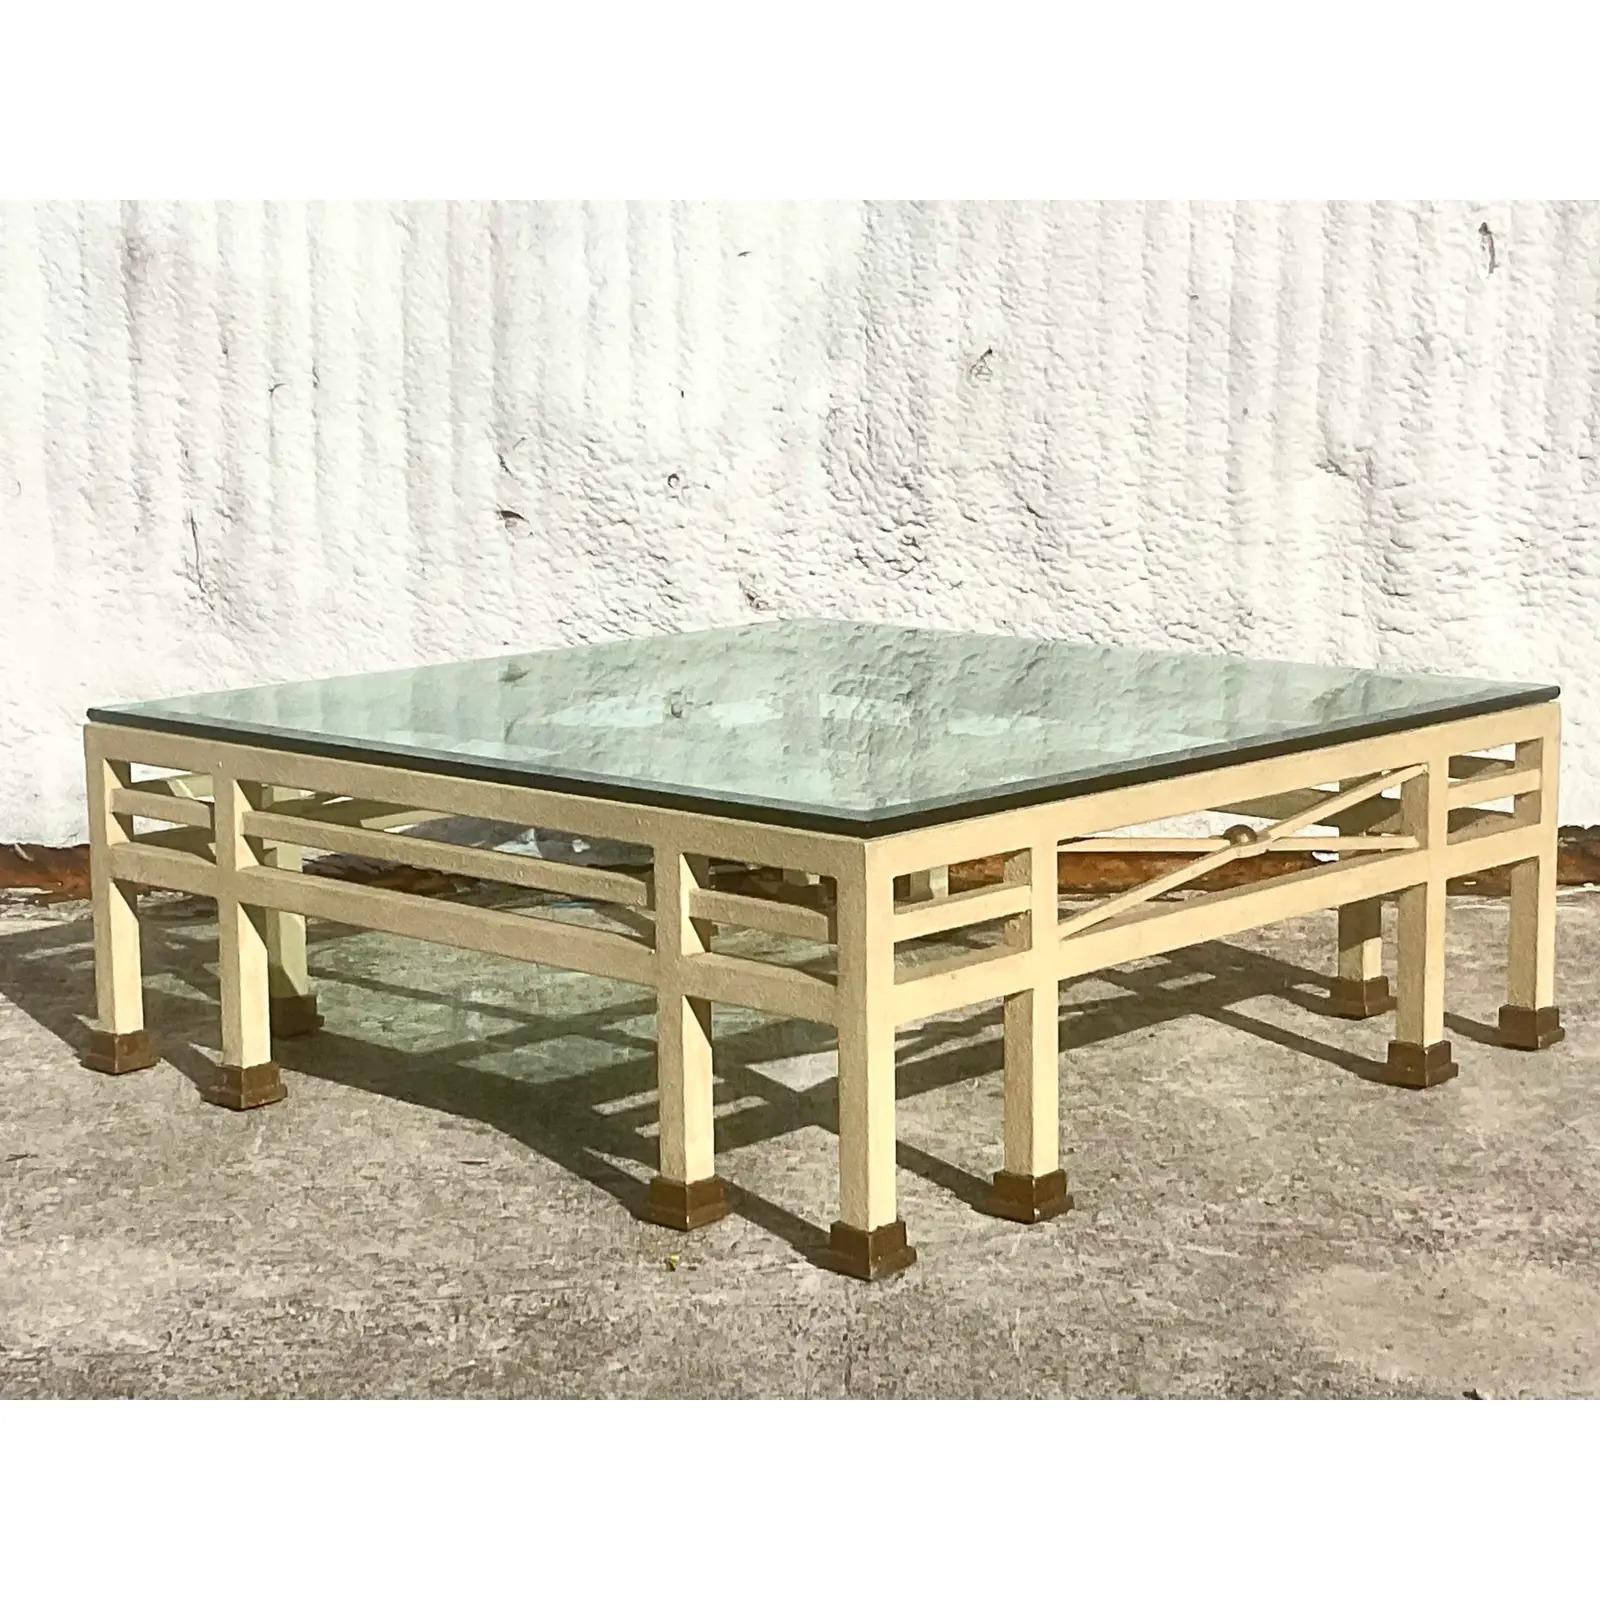 A fantastic monumental vintage coffee table. A chic PostModern design with a textured finish over metal. Thick glass top rests on the frame. Acquired from a Palm Beach estate.